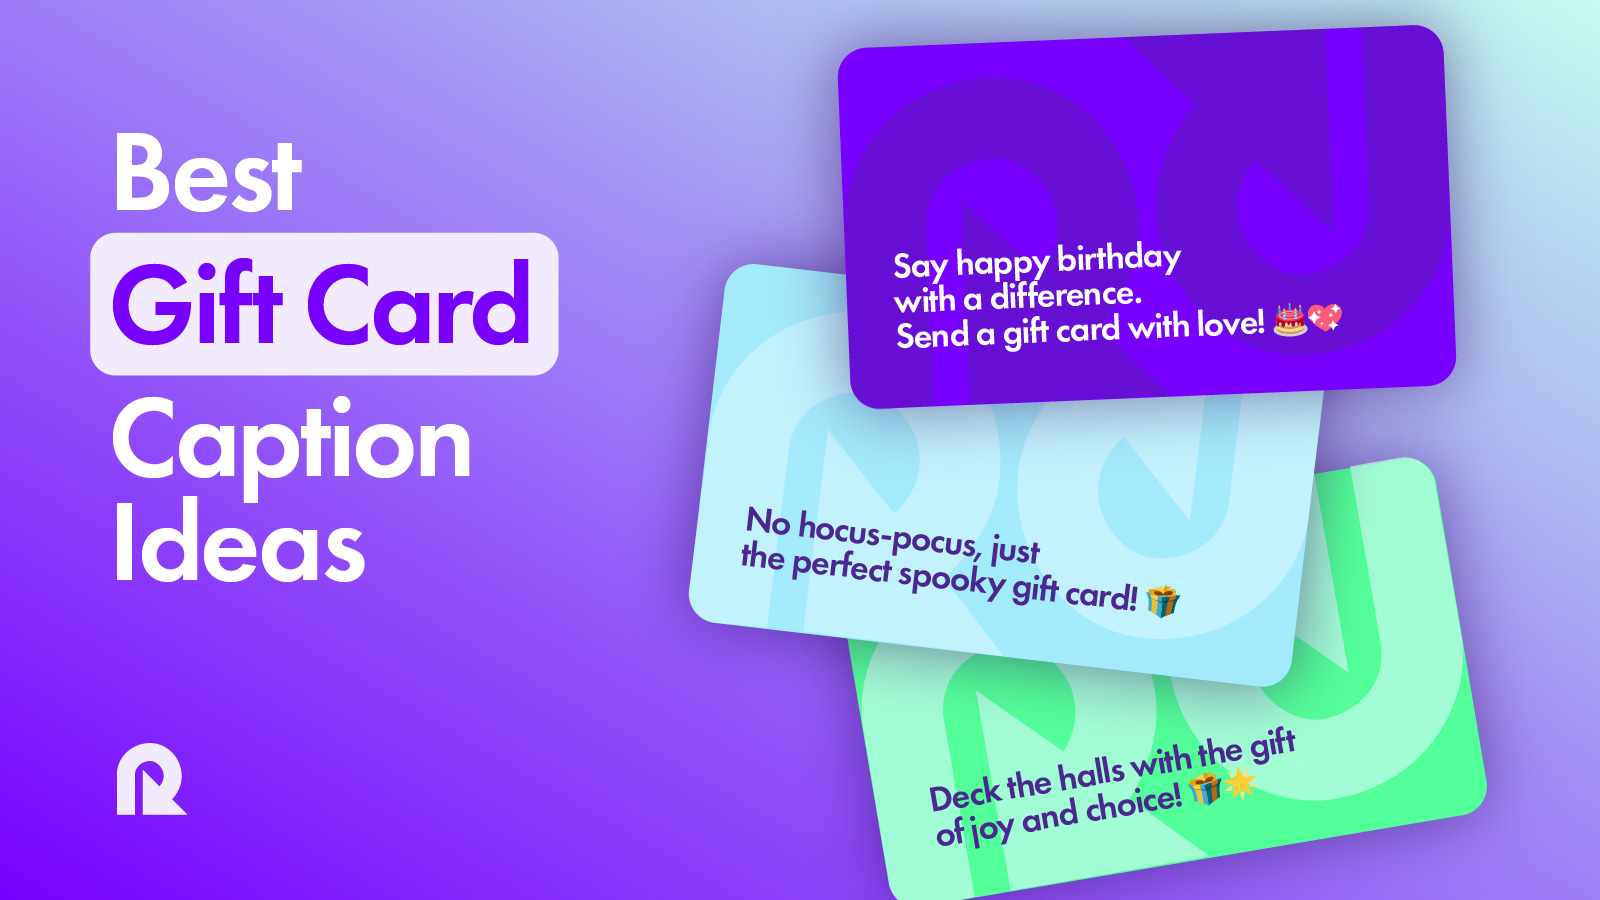 72 Best Gift Card Caption Ideas To Boost Your Promos - Reloadly